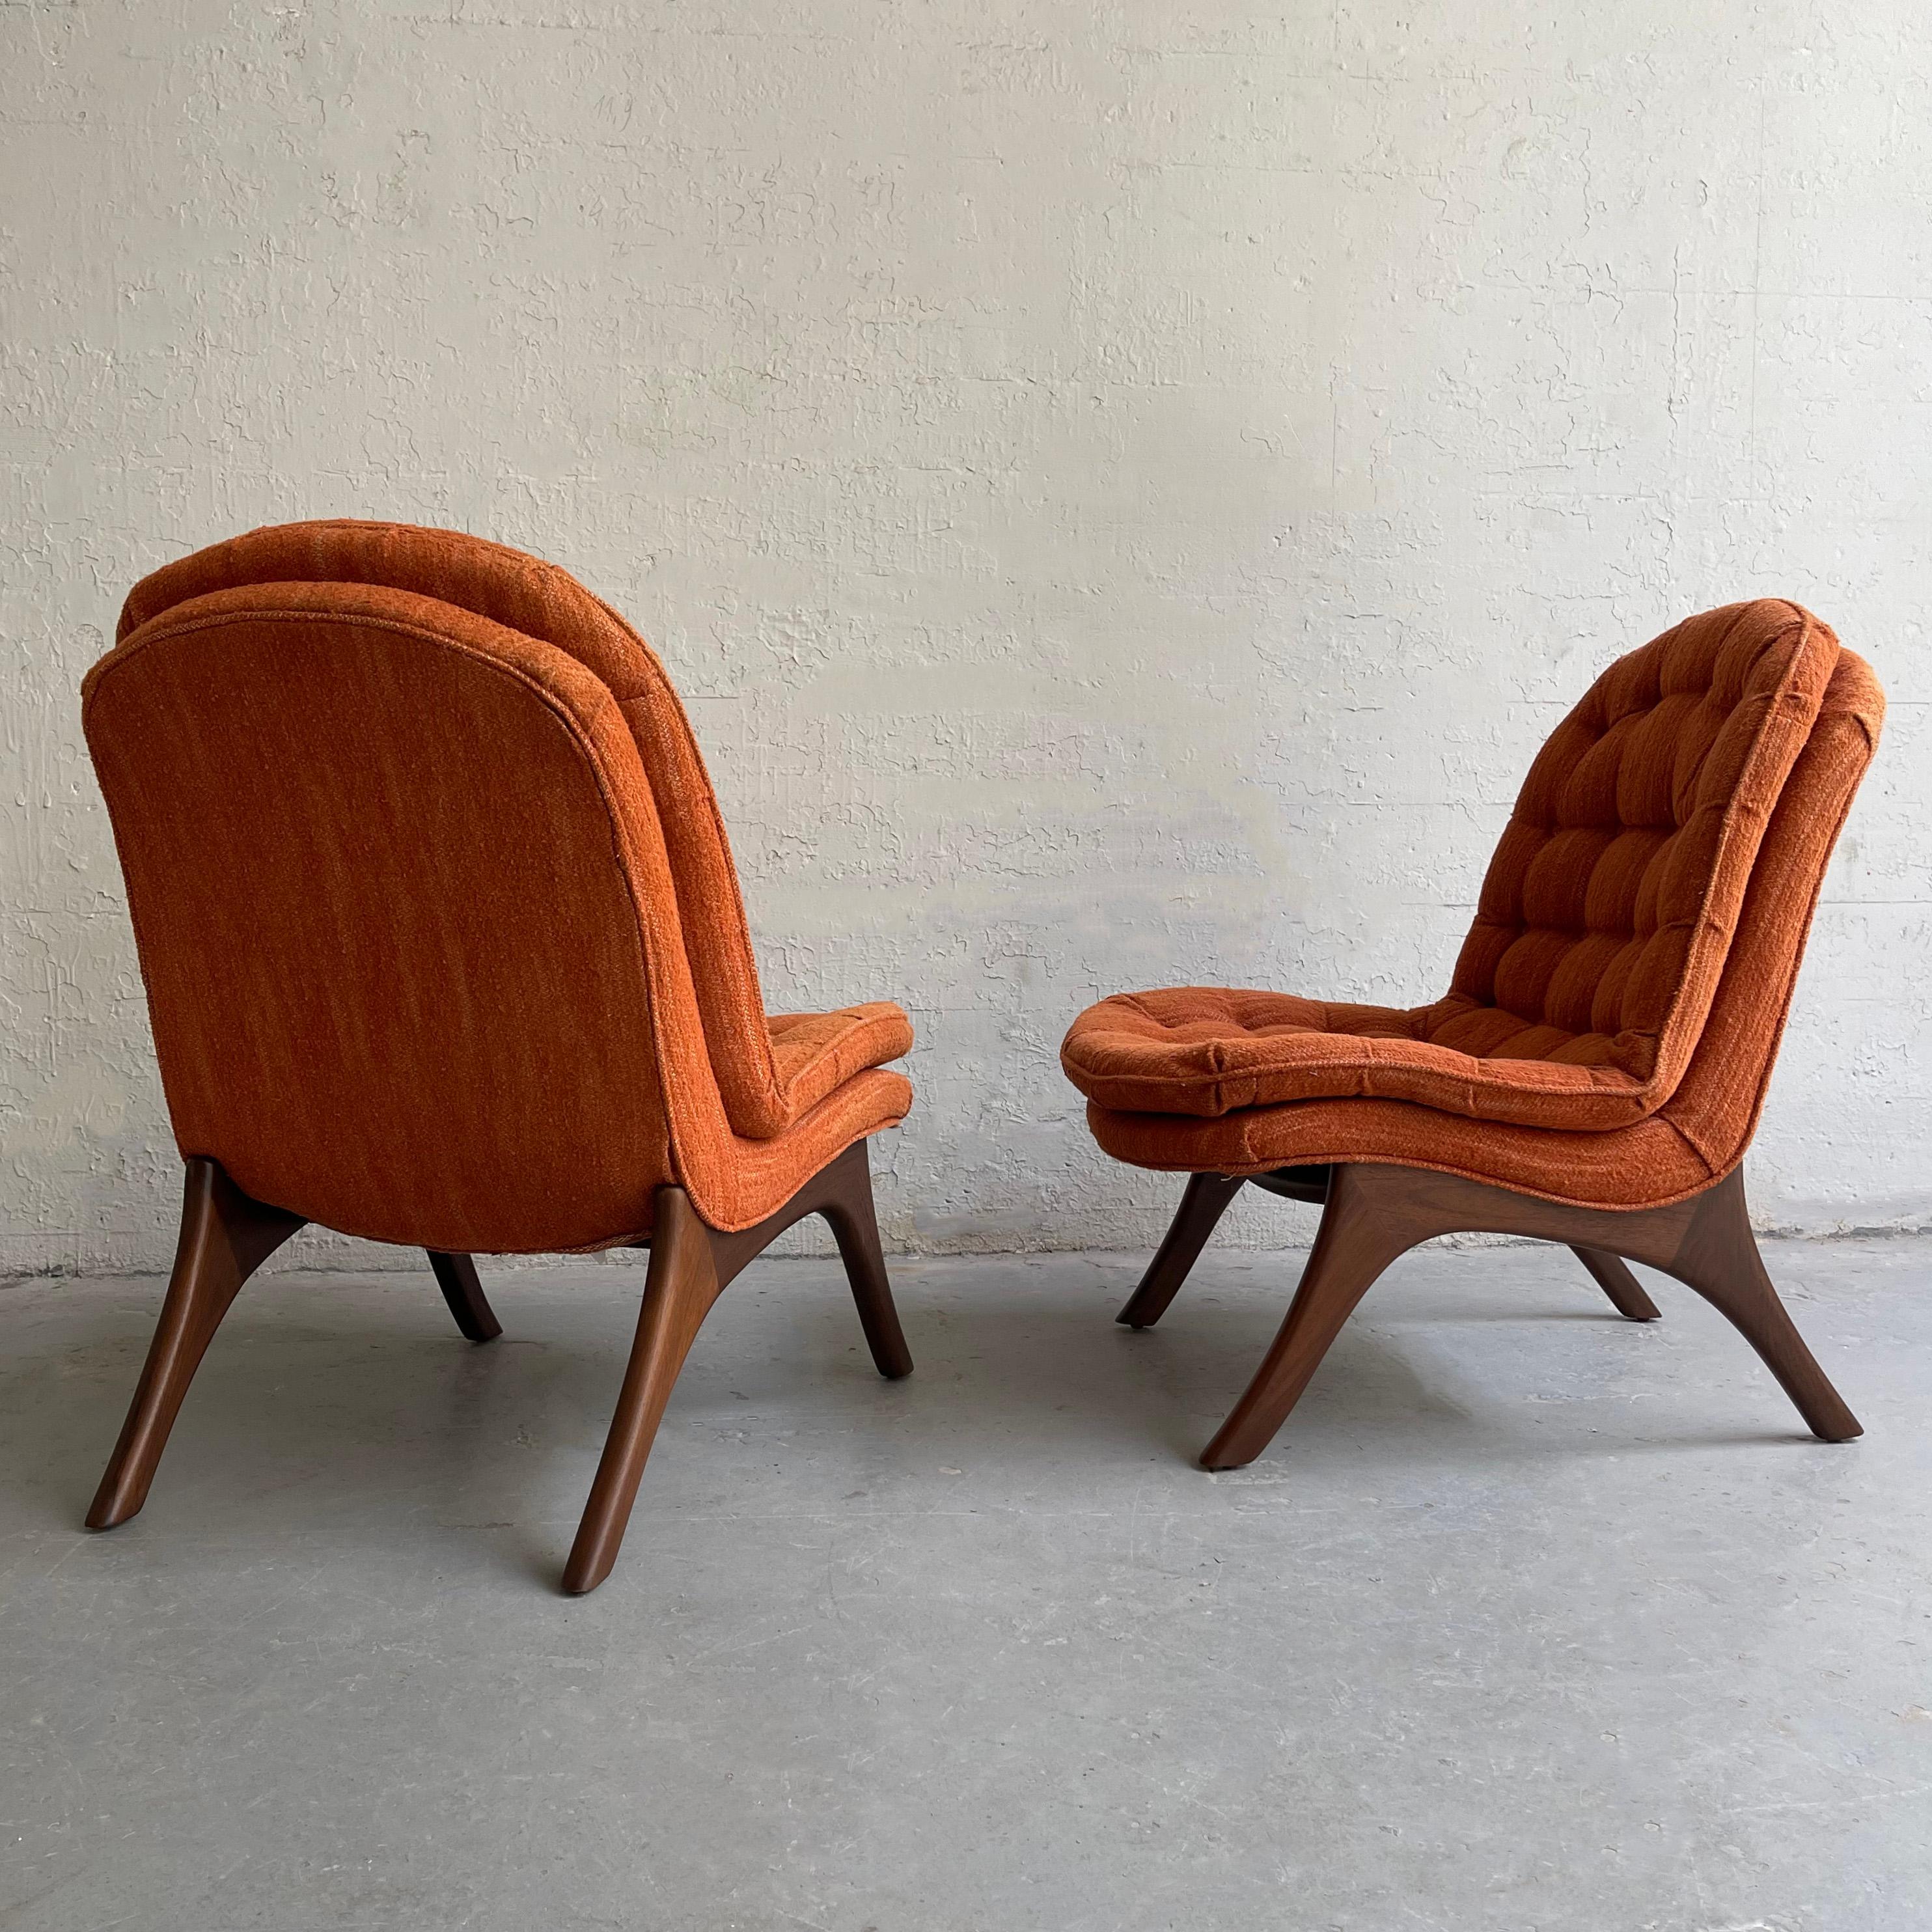 Mid-Century Modern Slipper Chairs By Adrian Pearsall For Craft Associates 1